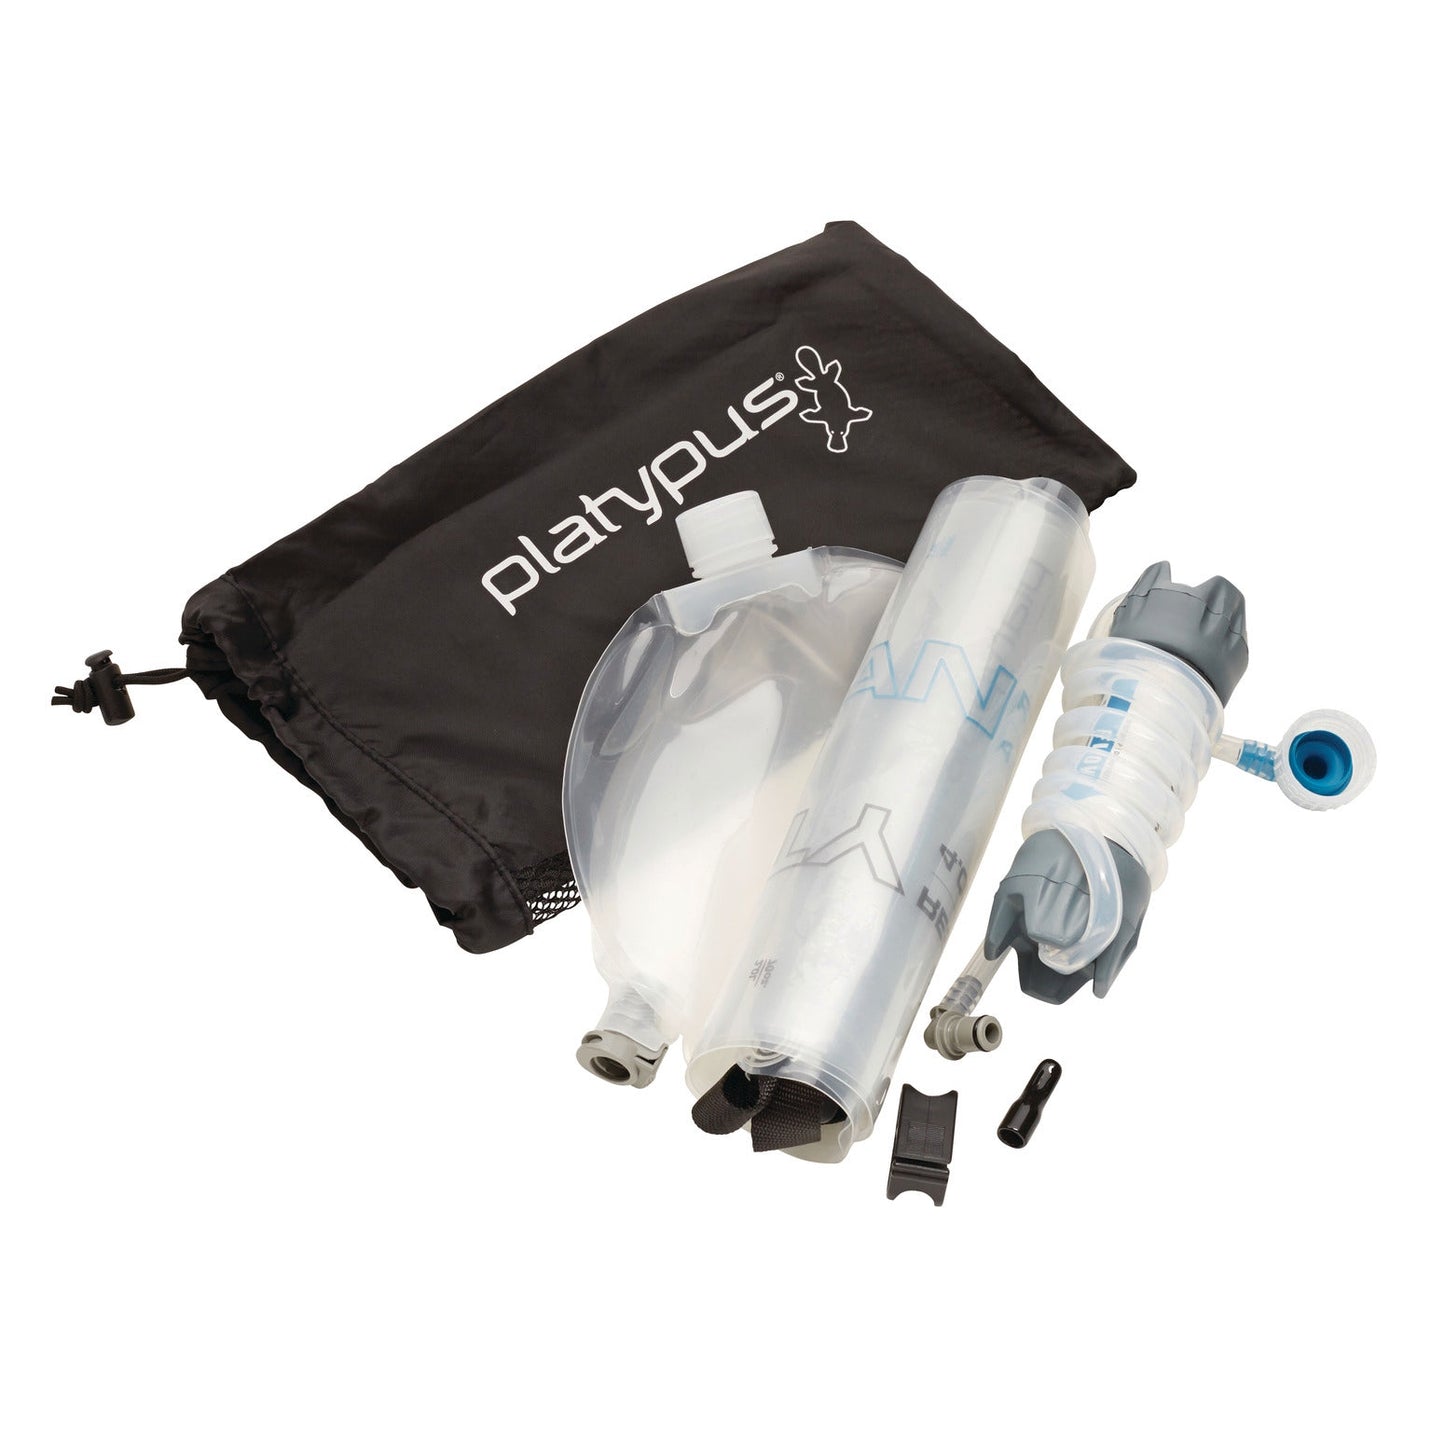 GravityWorks™ Water Filter System